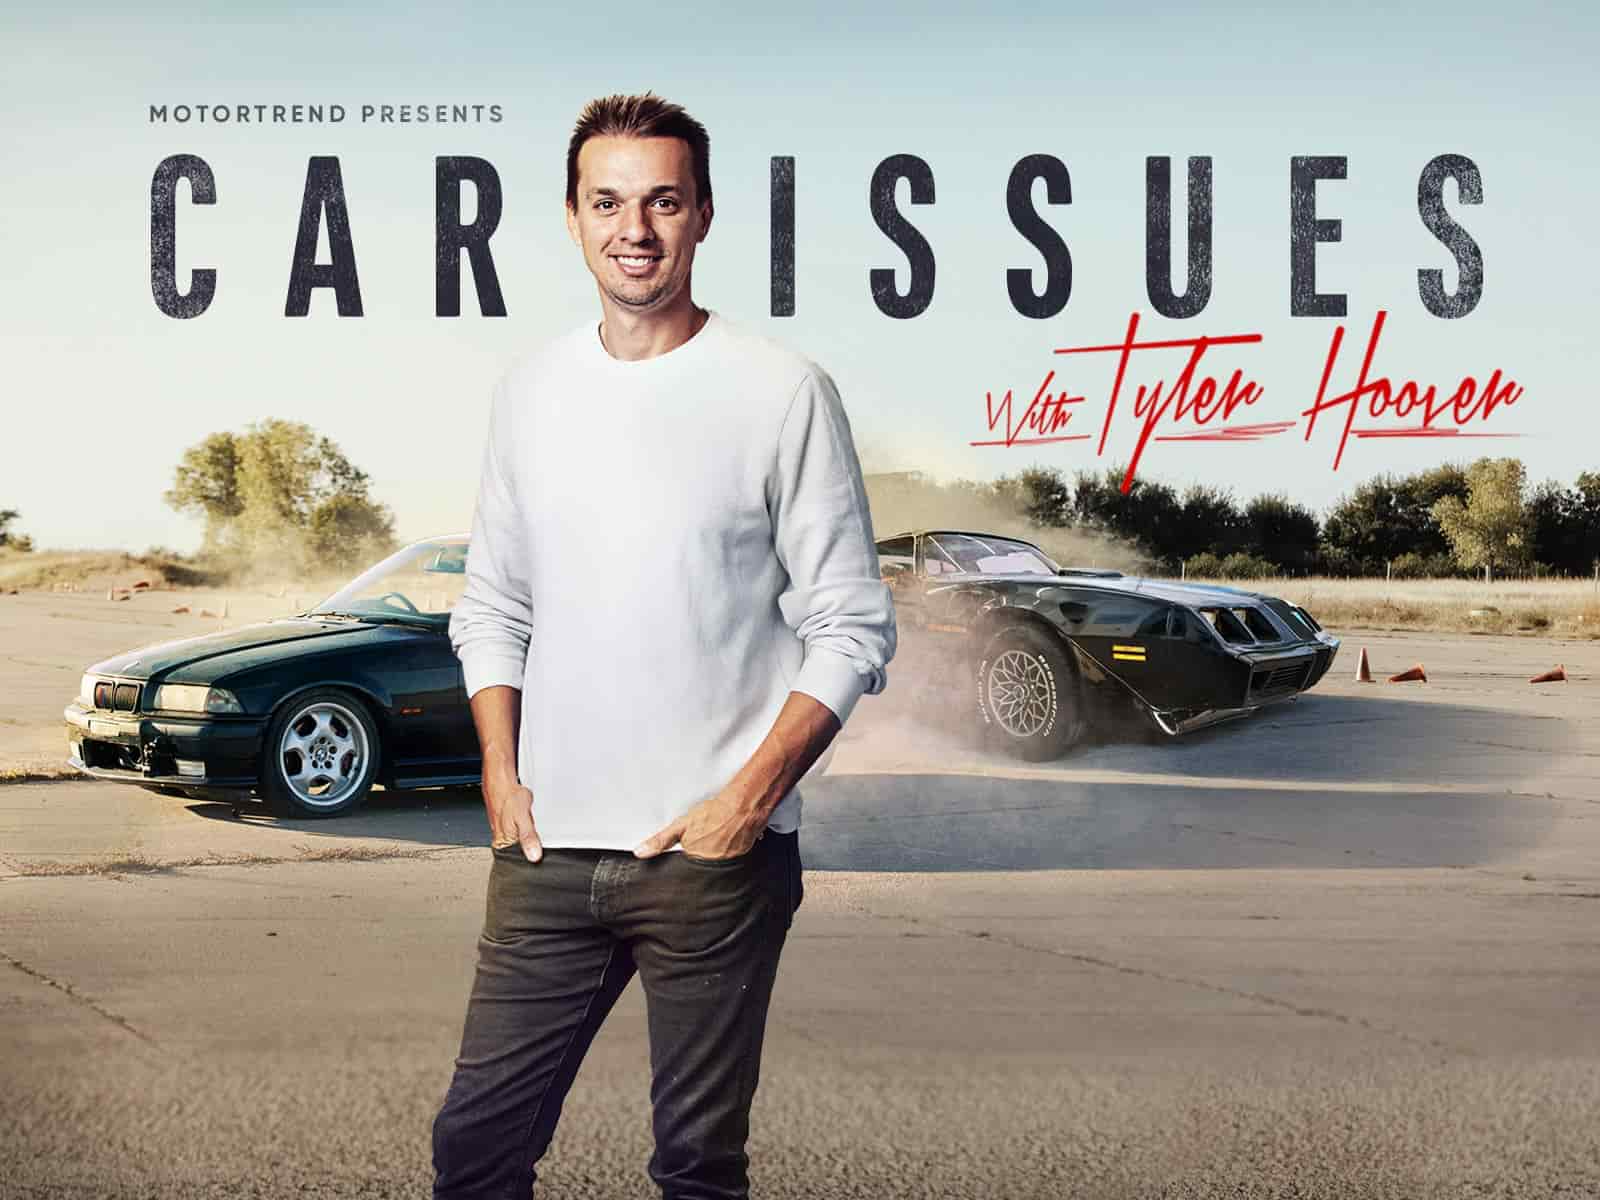 Image of Tyler Hoover as the main cast member of the show Car Issues